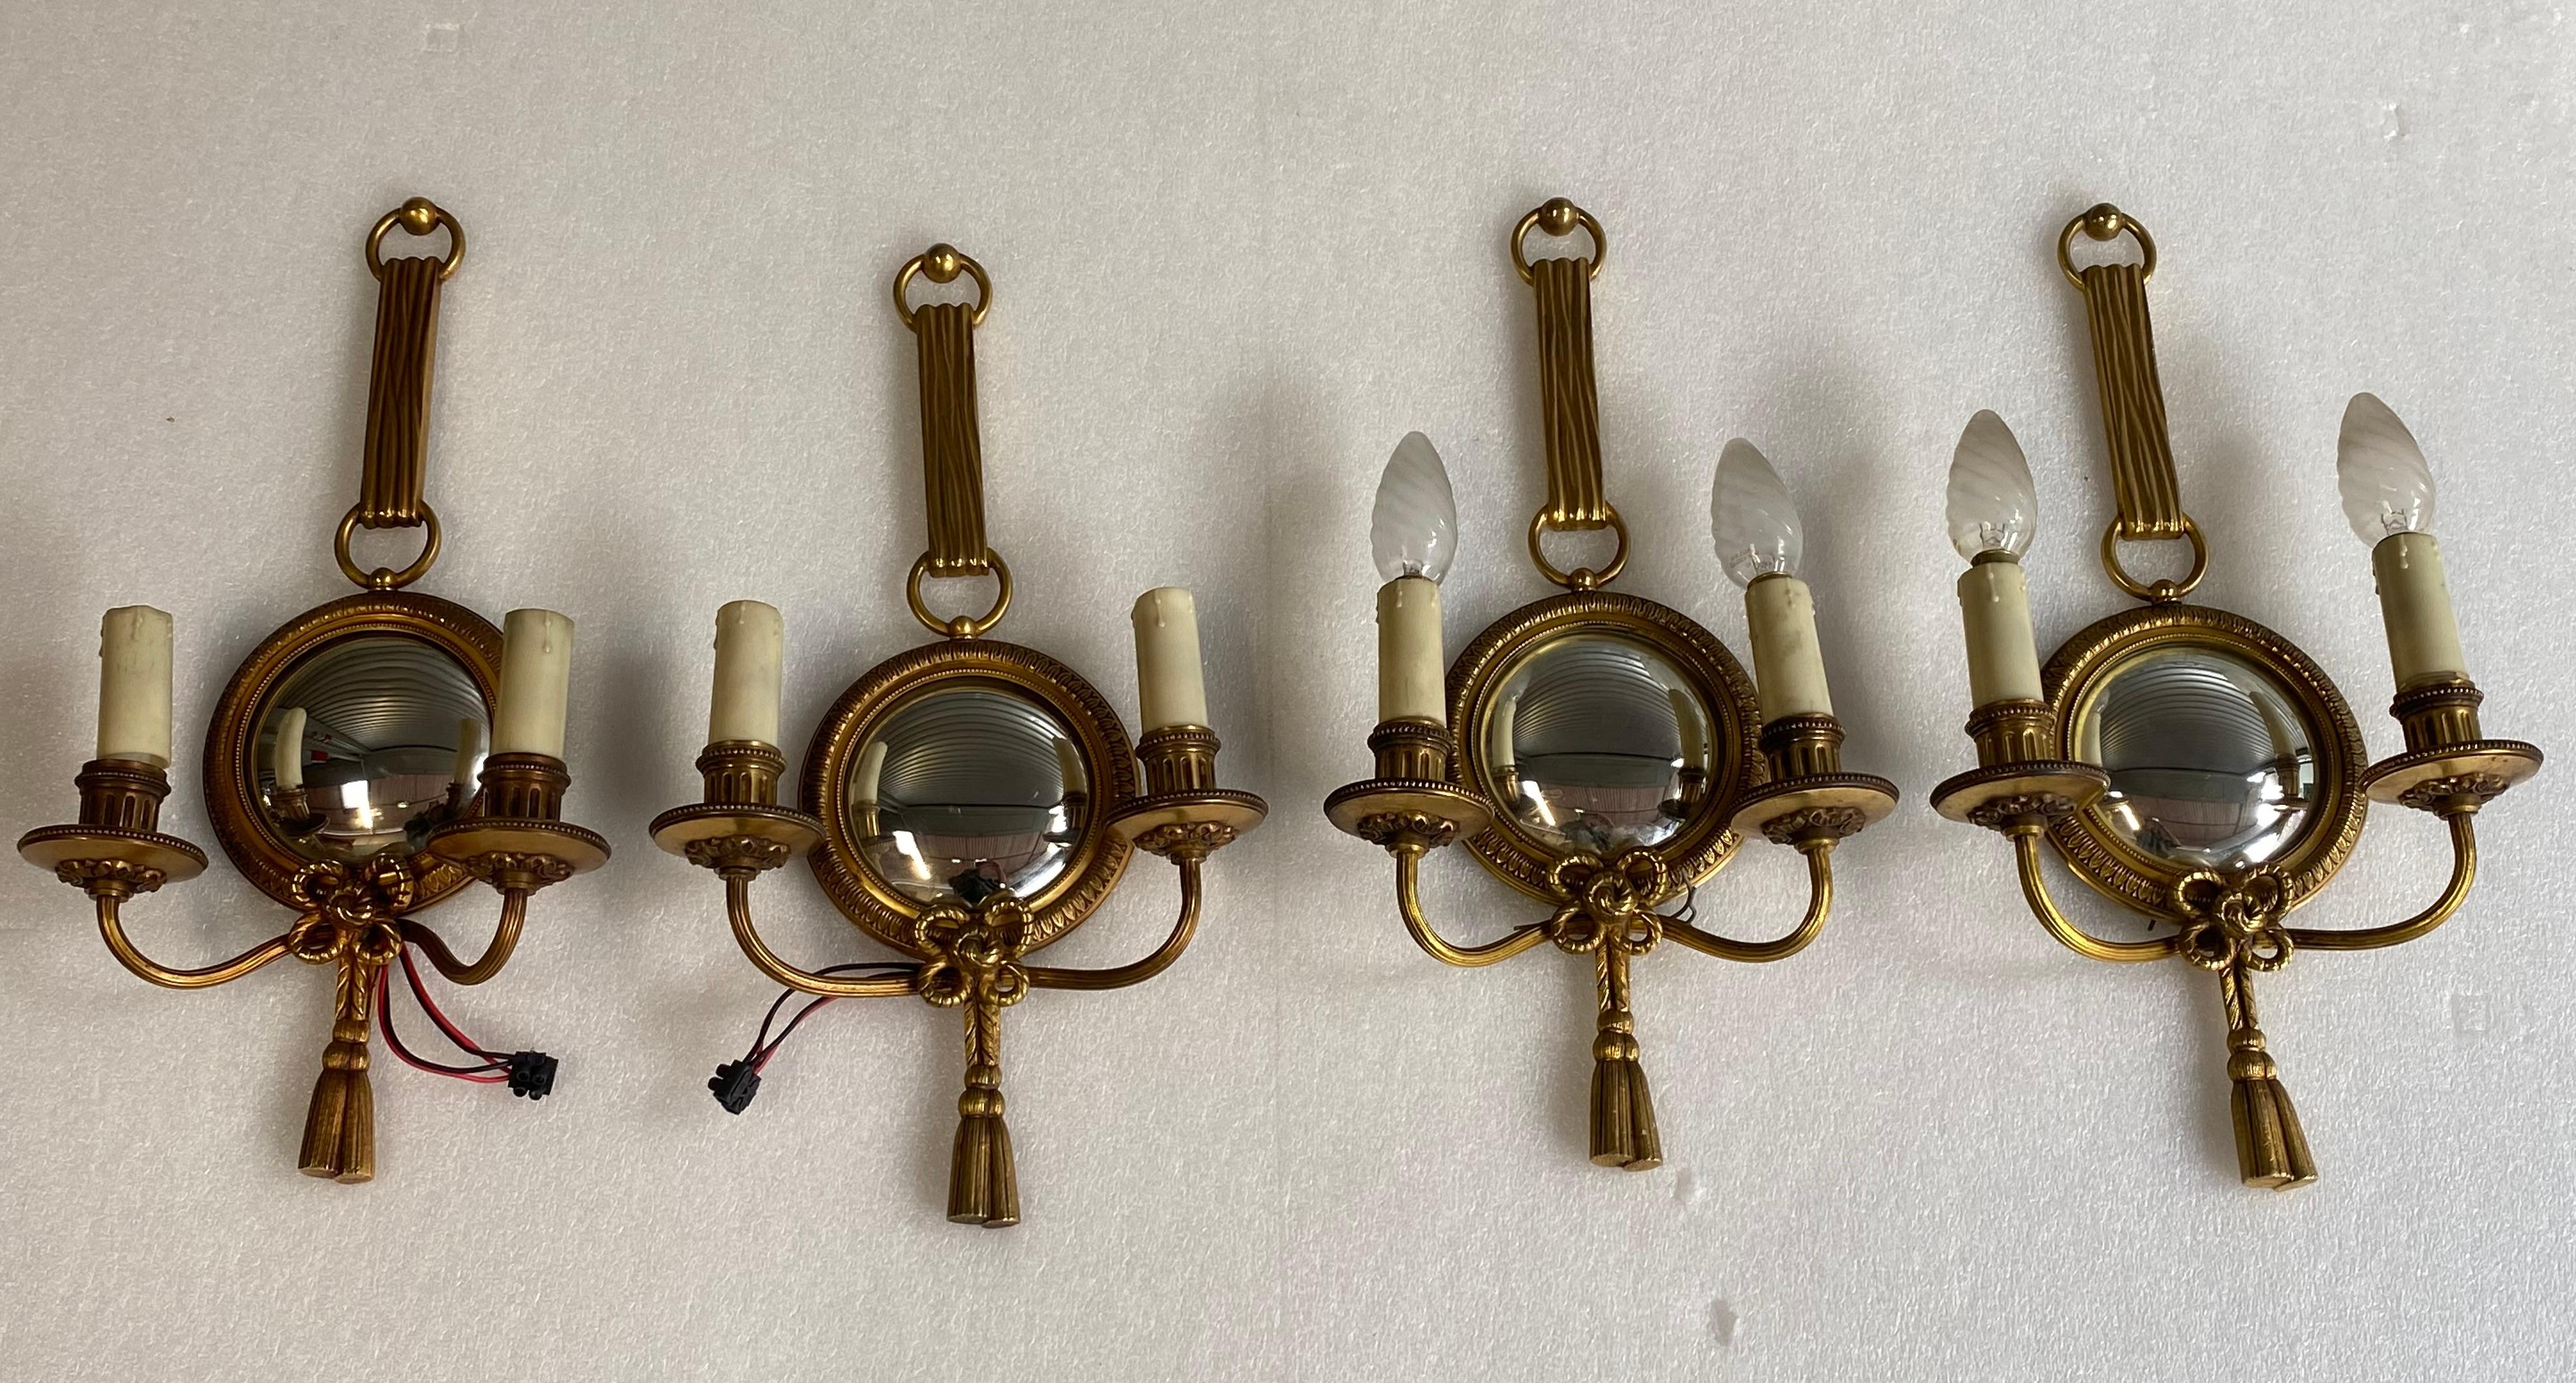 2 Pairs of sconces with convex mirror, gilted bronze, good condition, Petitot signed, everything is screwed.
Circa 1950/70
Diameter frame mirror 14 cm
Diameter mirror 10 cm

Width : 23 cm
Height : 42 cm
Depth : 9 cm